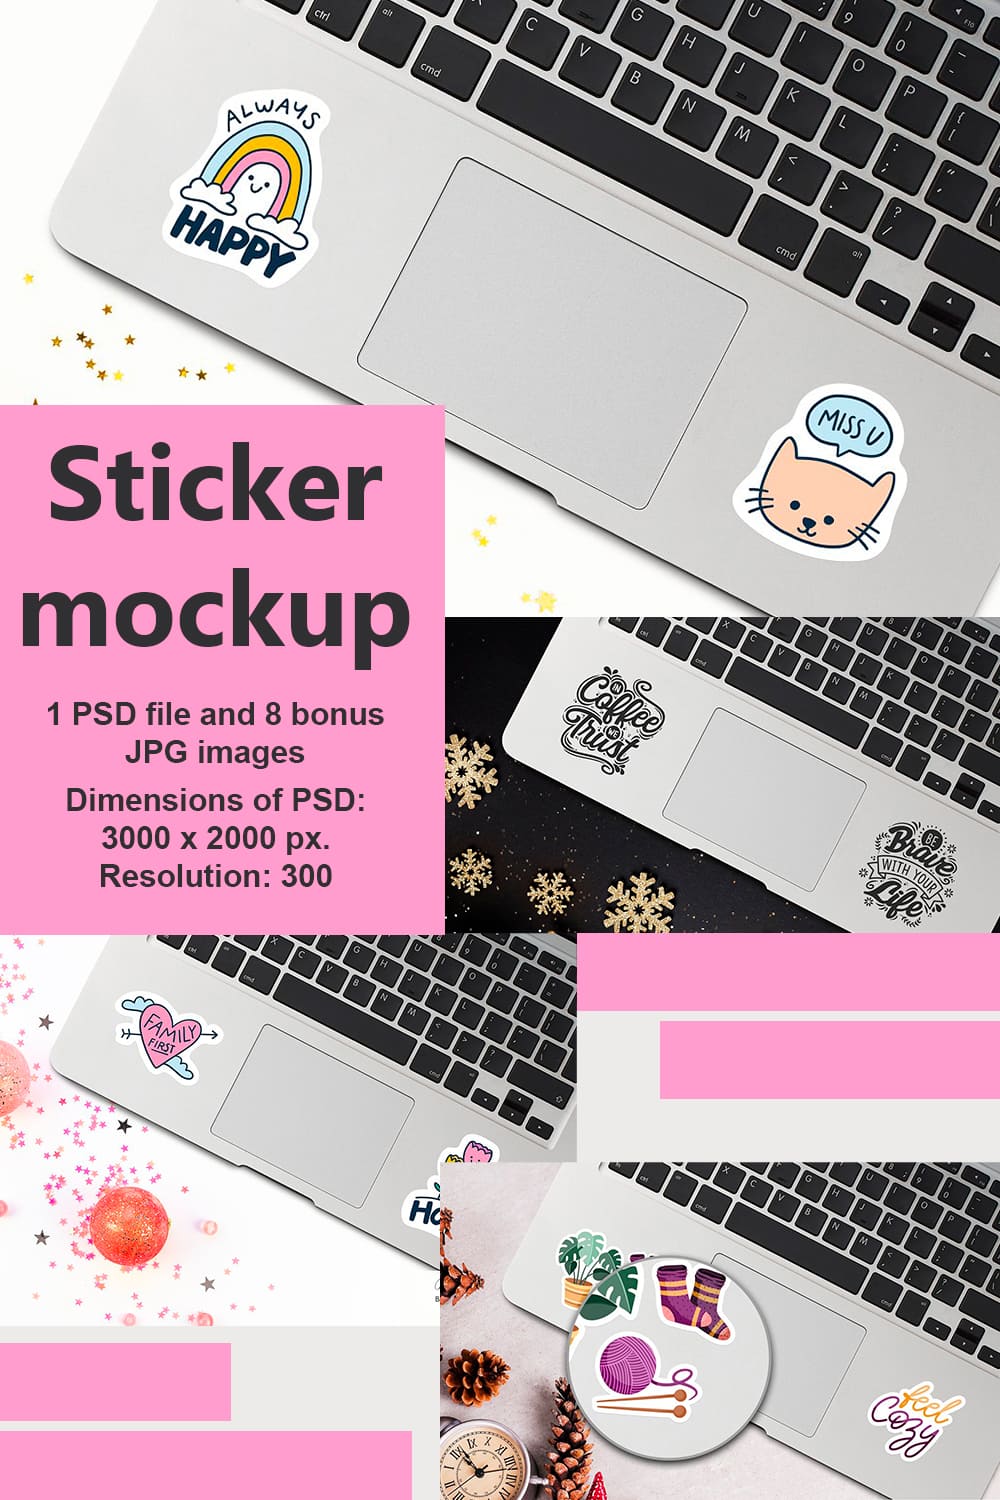 Set of laptop images with great stickers.